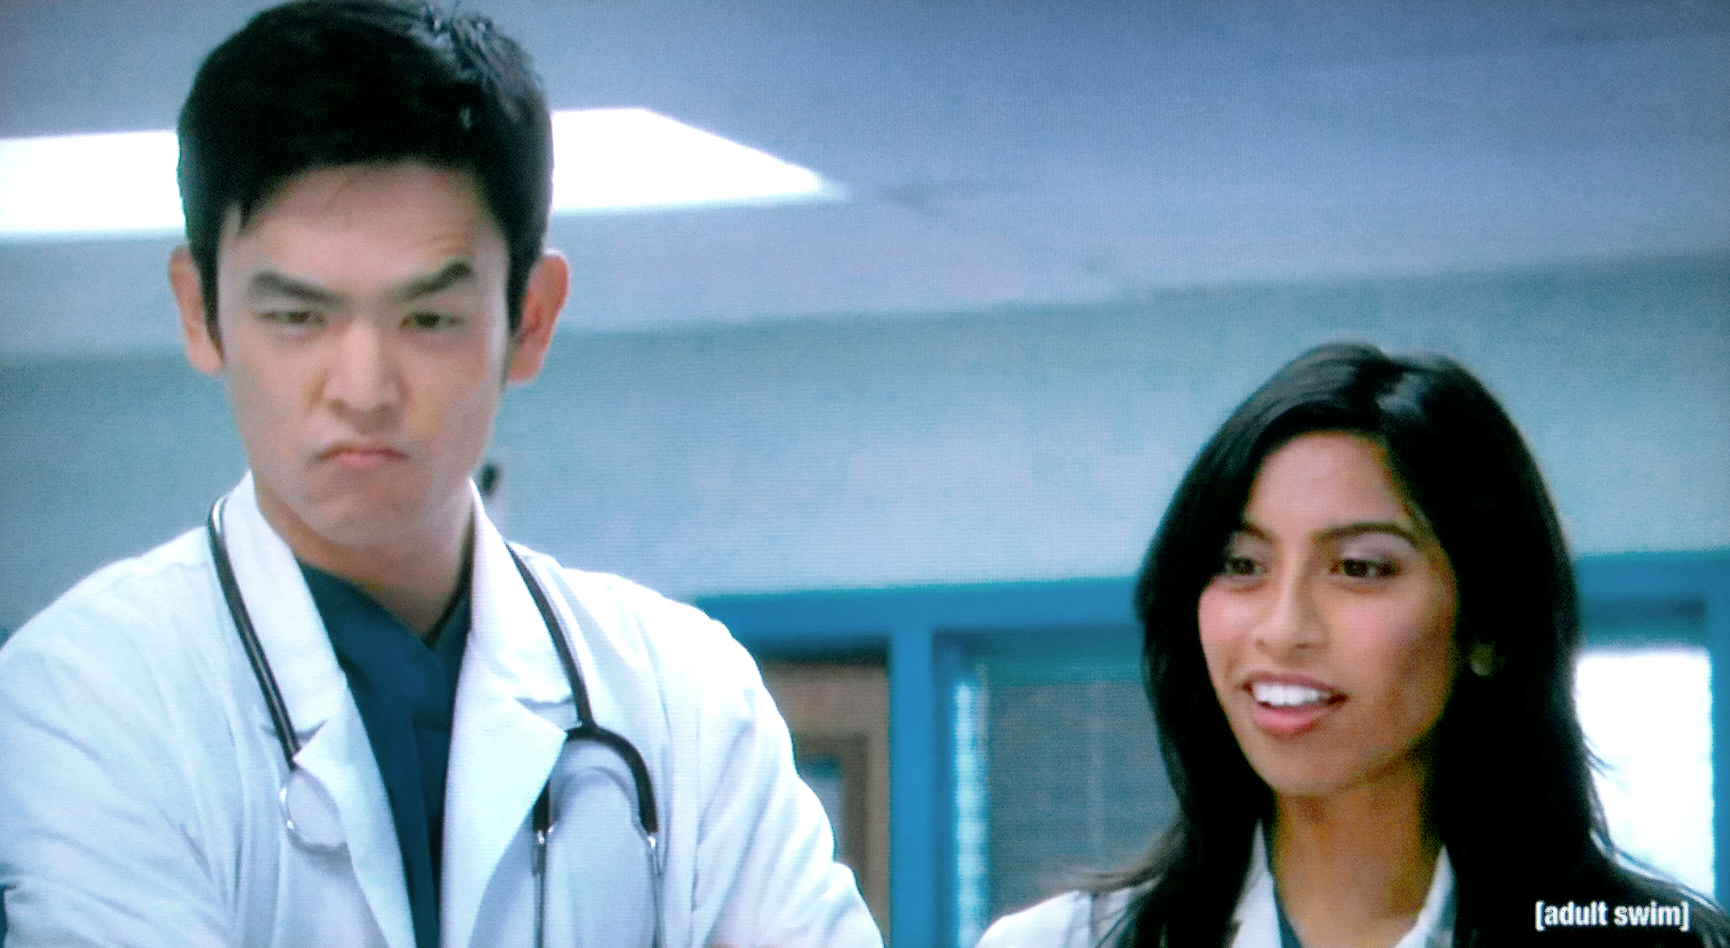 John Cho and Rasika Mathur, impressed with the protocol at Children's Hospital, only on [adult swim]